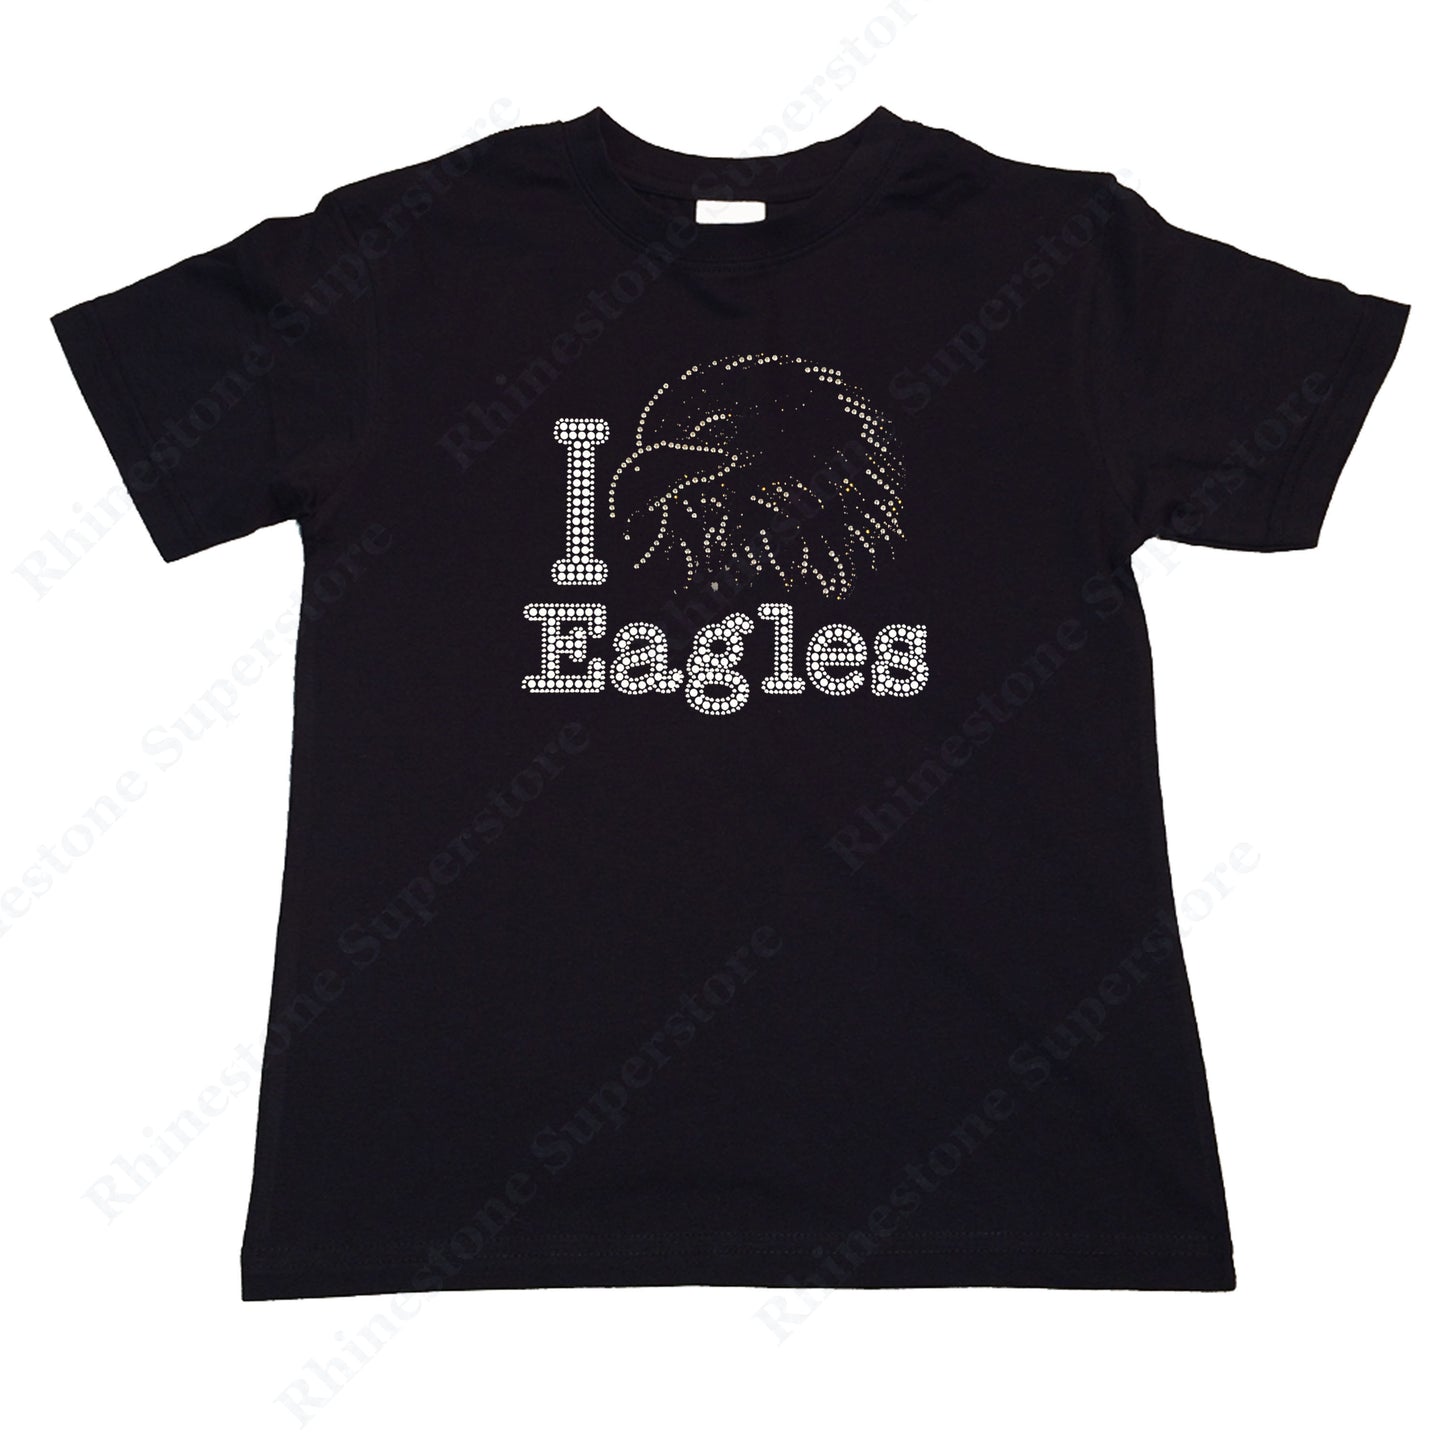 Girls Rhinestone T-Shirt " I Love Eagles " Kids Size 3 to 14 Available